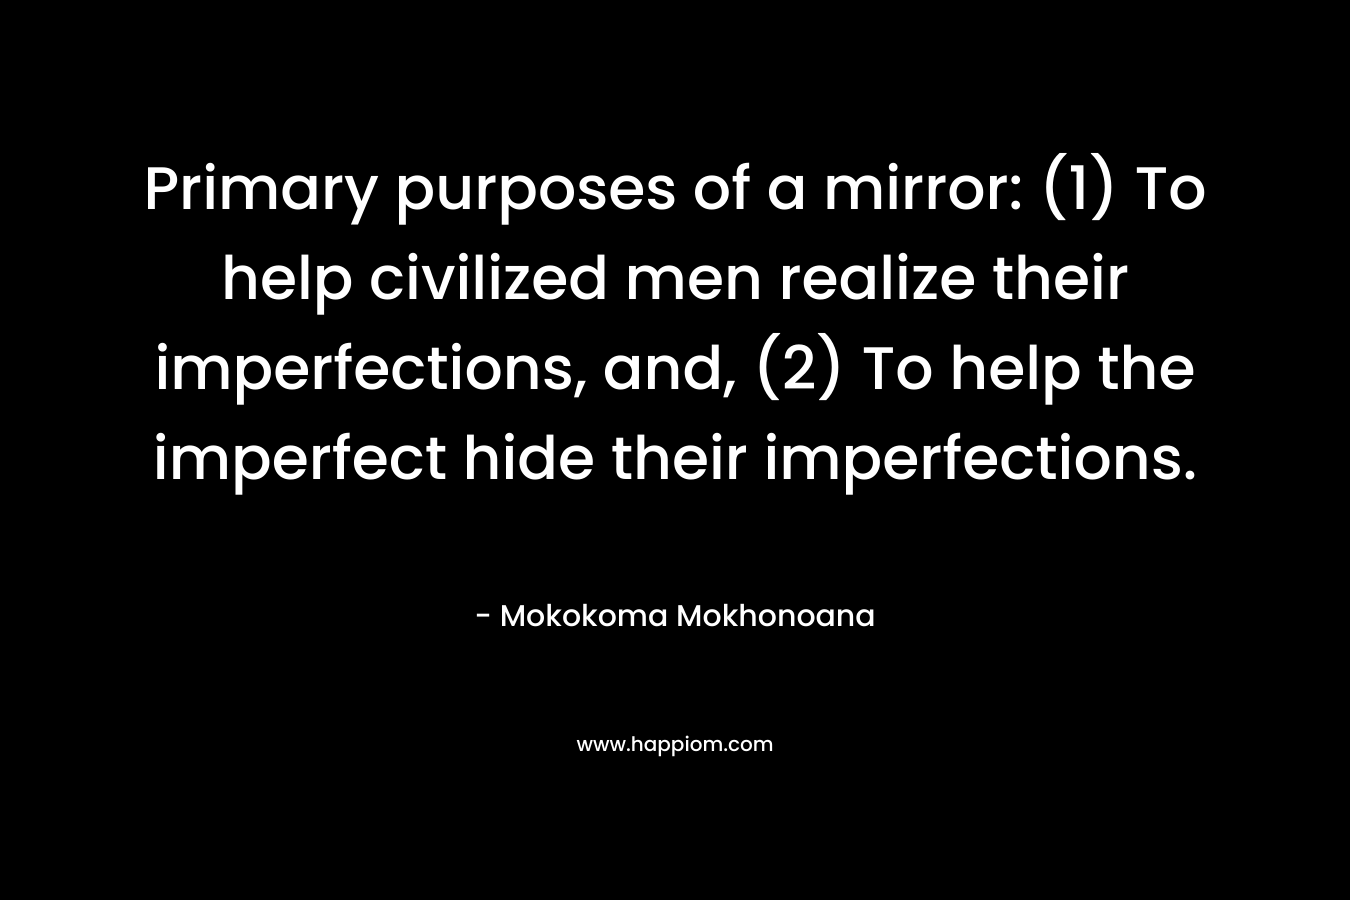 Primary purposes of a mirror: (1) To help civilized men realize their imperfections, and, (2) To help the imperfect hide their imperfections. – Mokokoma Mokhonoana